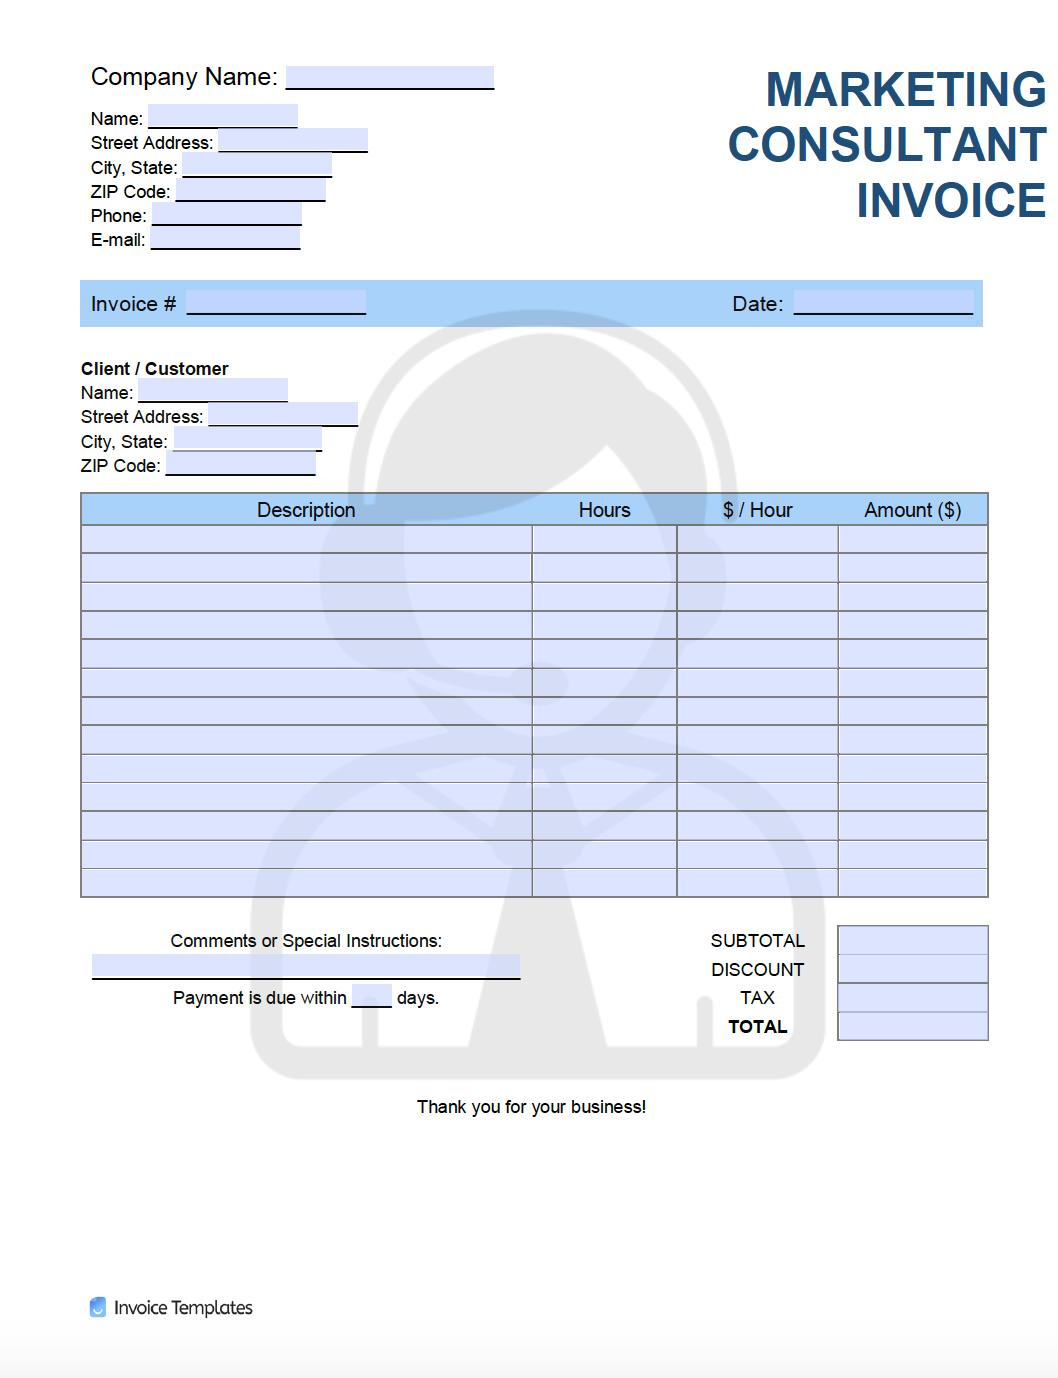 Free Consulting Invoice Template